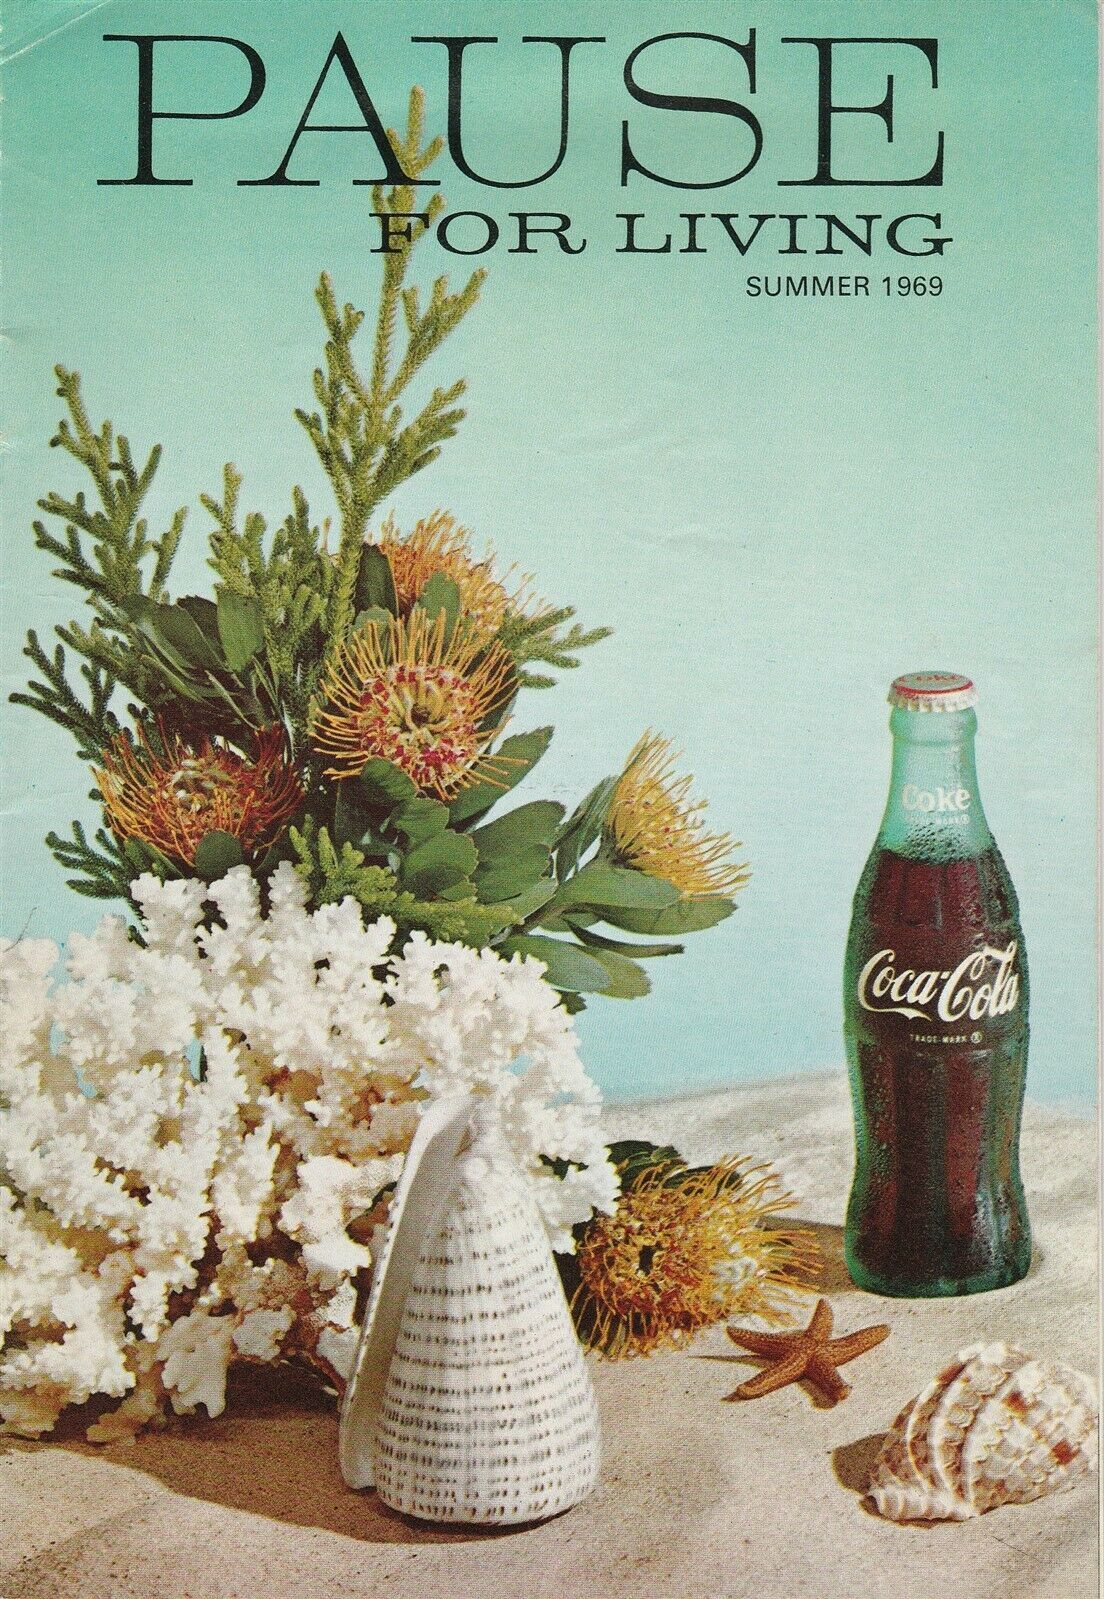 Pause for Living Summer 1969 Vintage Coca Cola Booklet Party Pronto Containers - $6.92